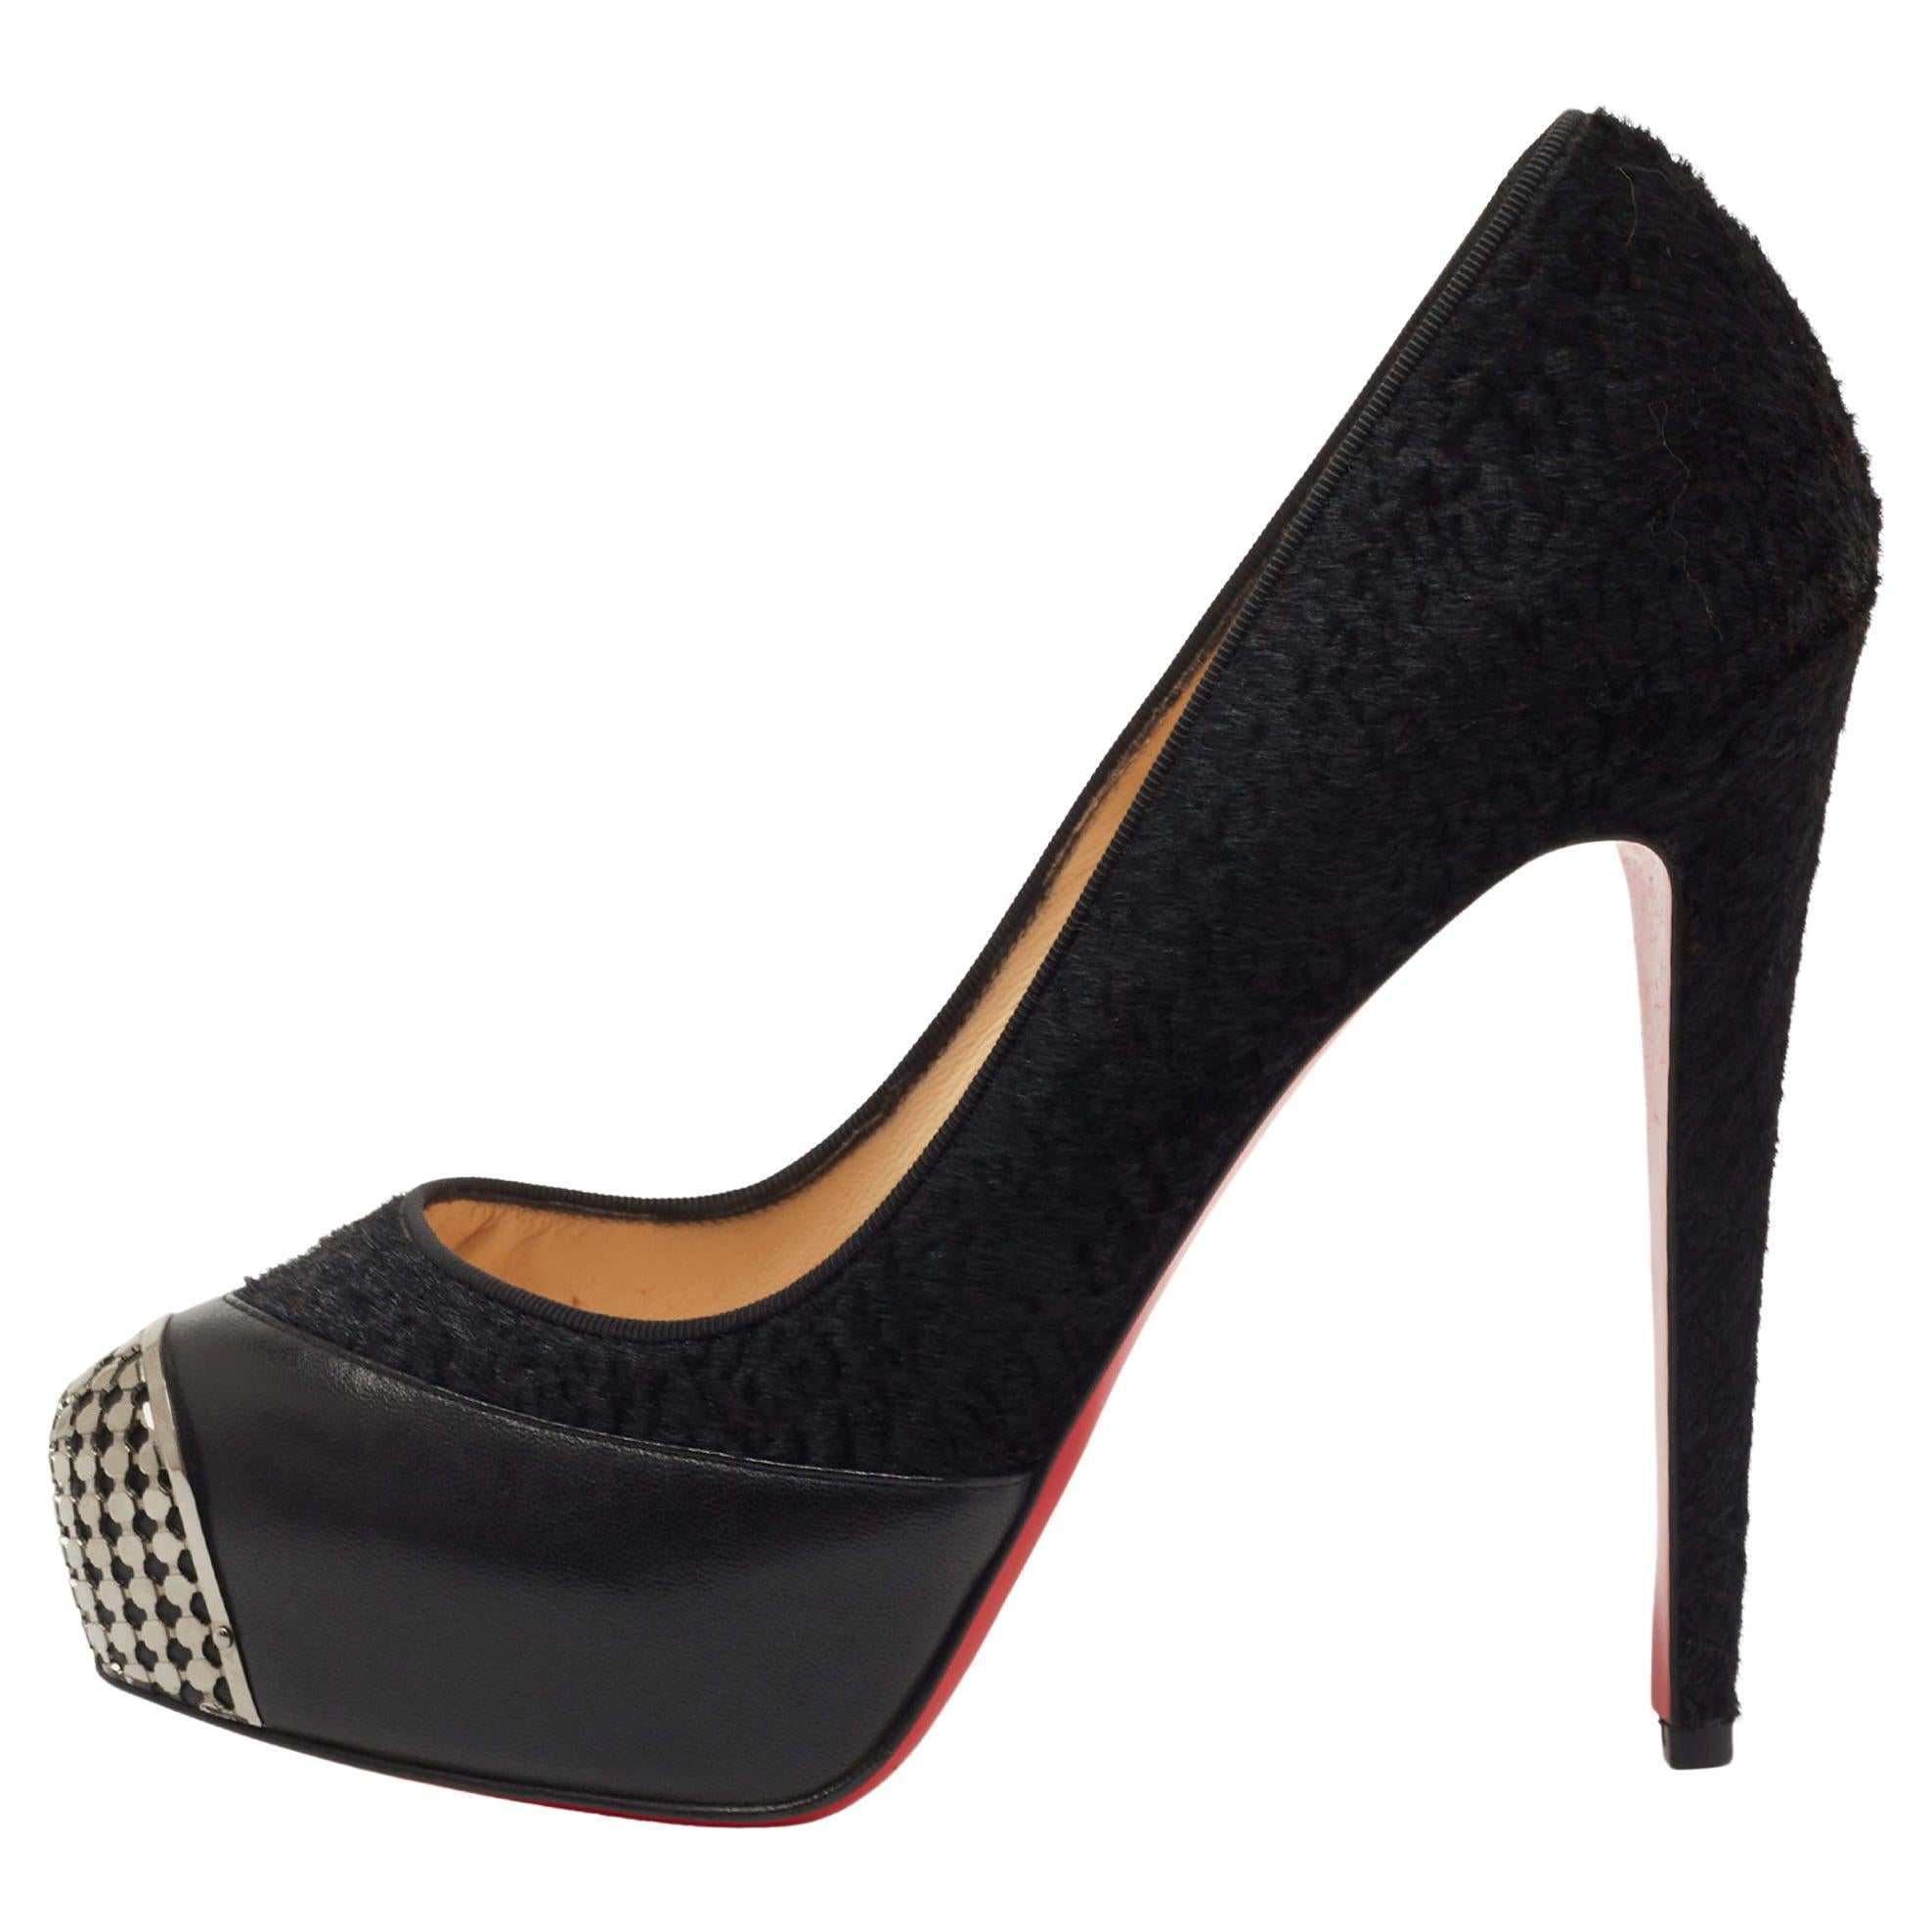 Christian Louboutin Black Calfhair and Leather Maggie Pumps Size 40 For Sale